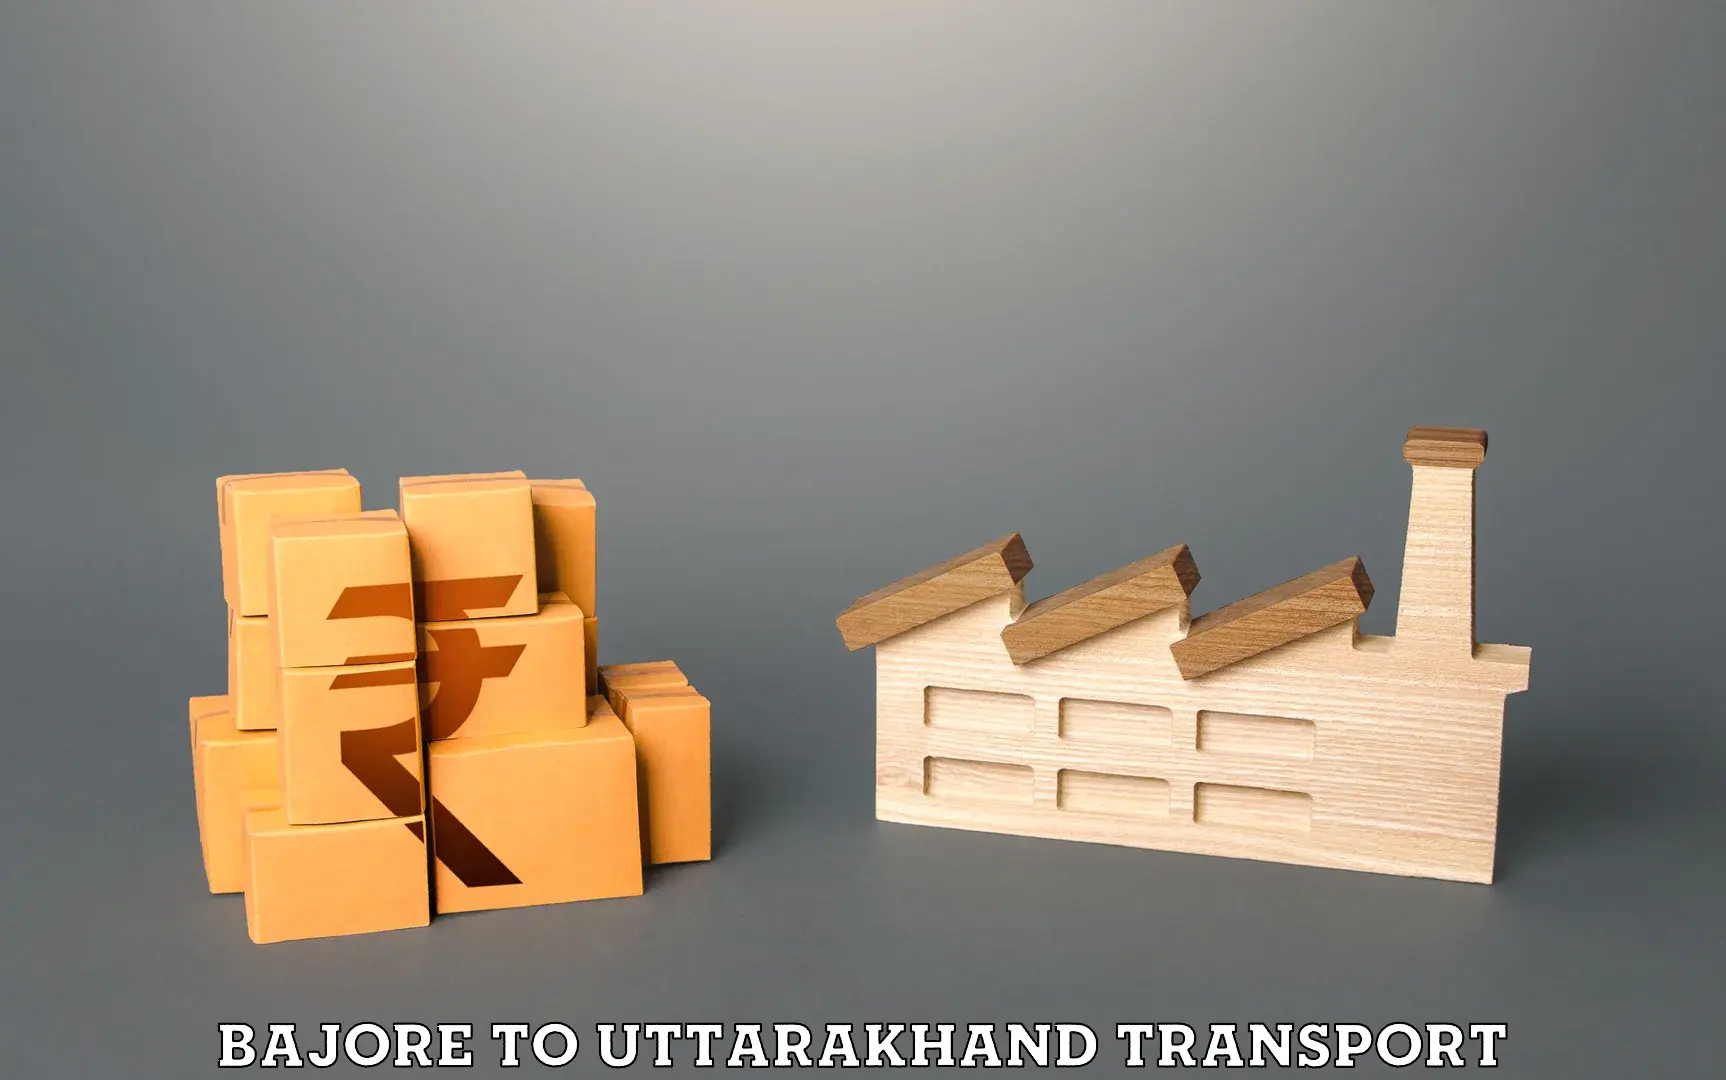 Truck transport companies in India Bajore to Haridwar